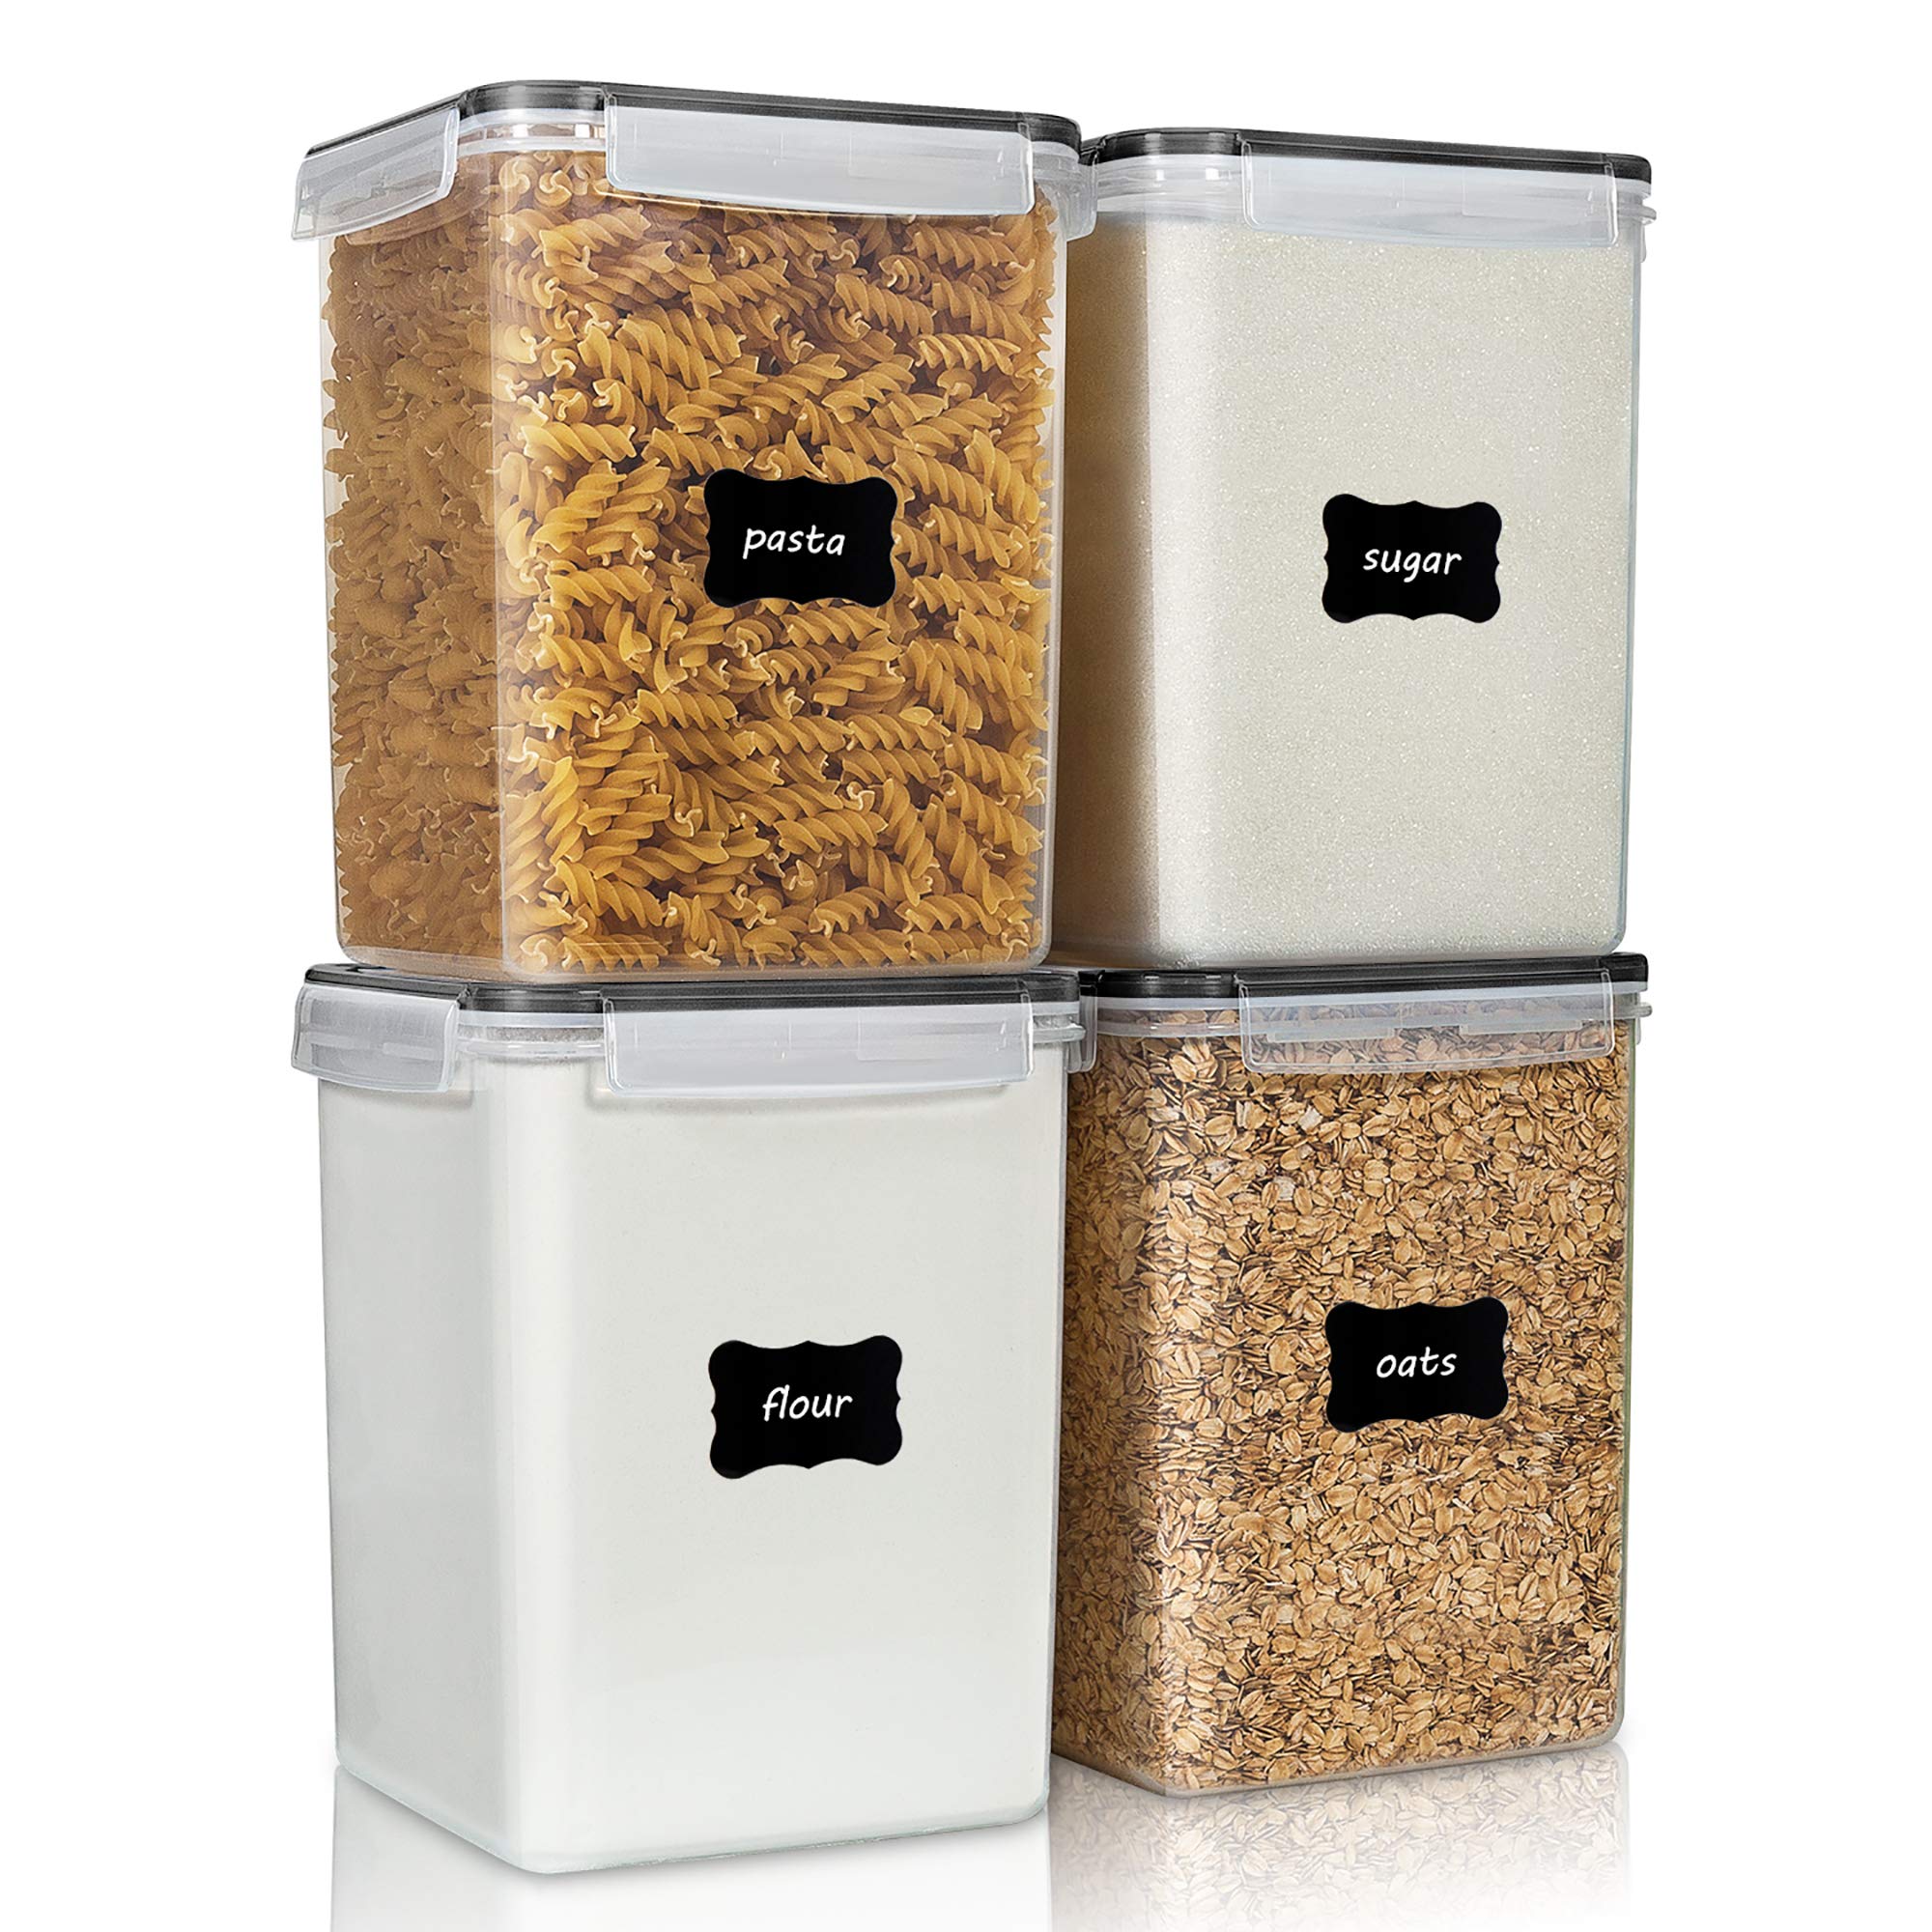 4 pk- Large Food Storage Airtight BPA Free Containers 5.2L $20